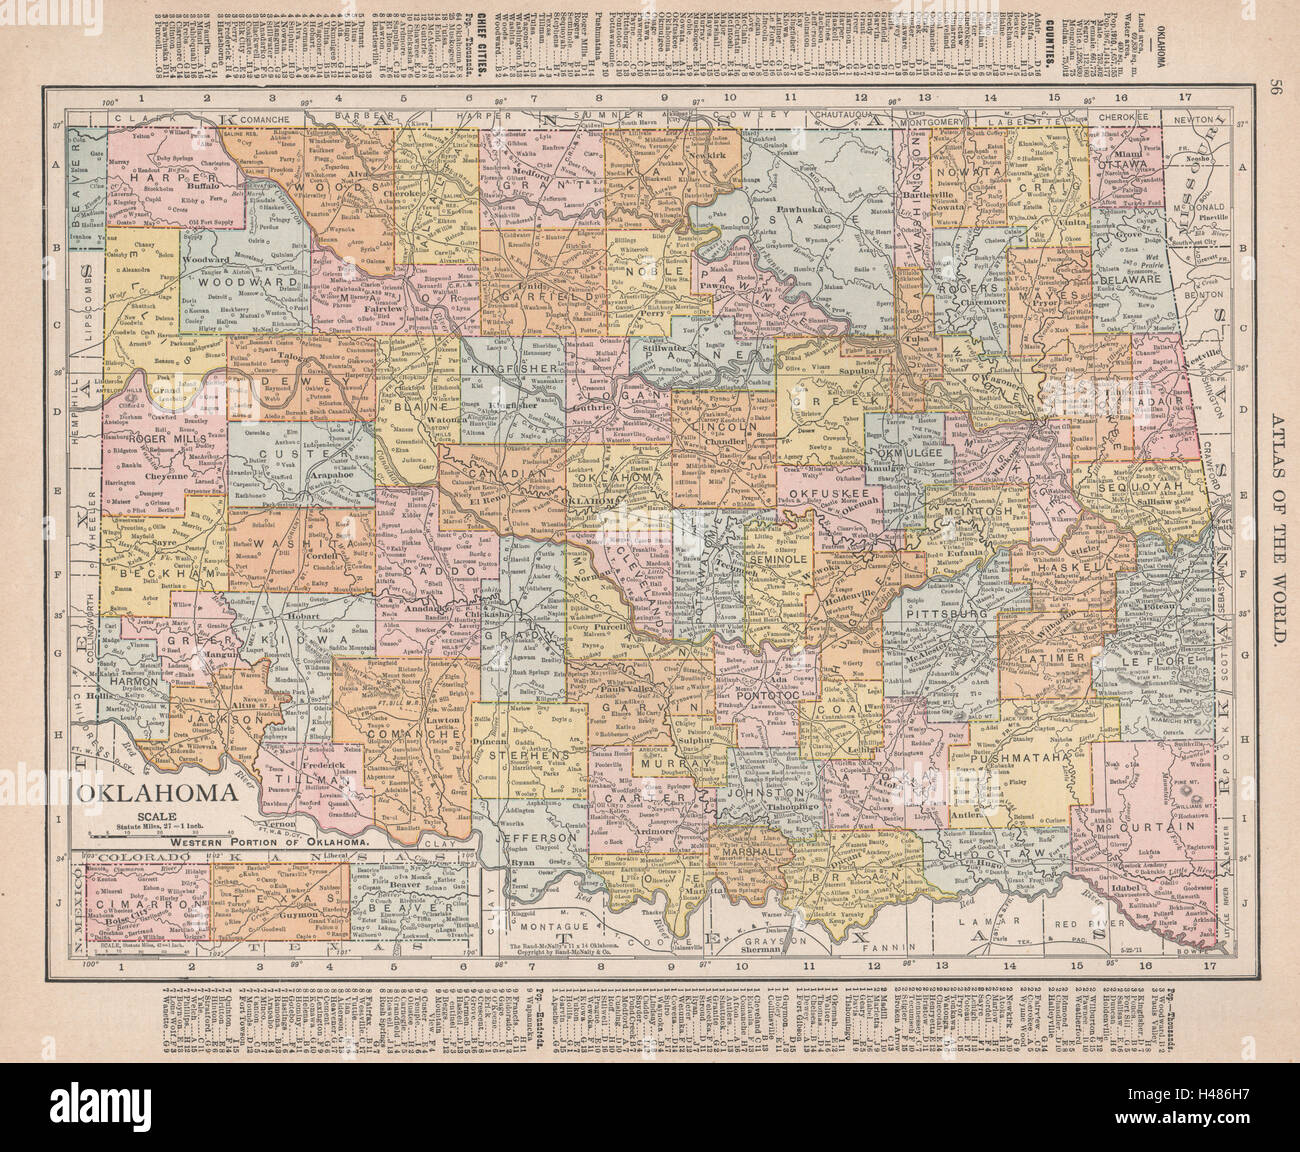 Oklahoma state map showing counties. RAND MCNALLY 1912 old antique chart Stock Photo